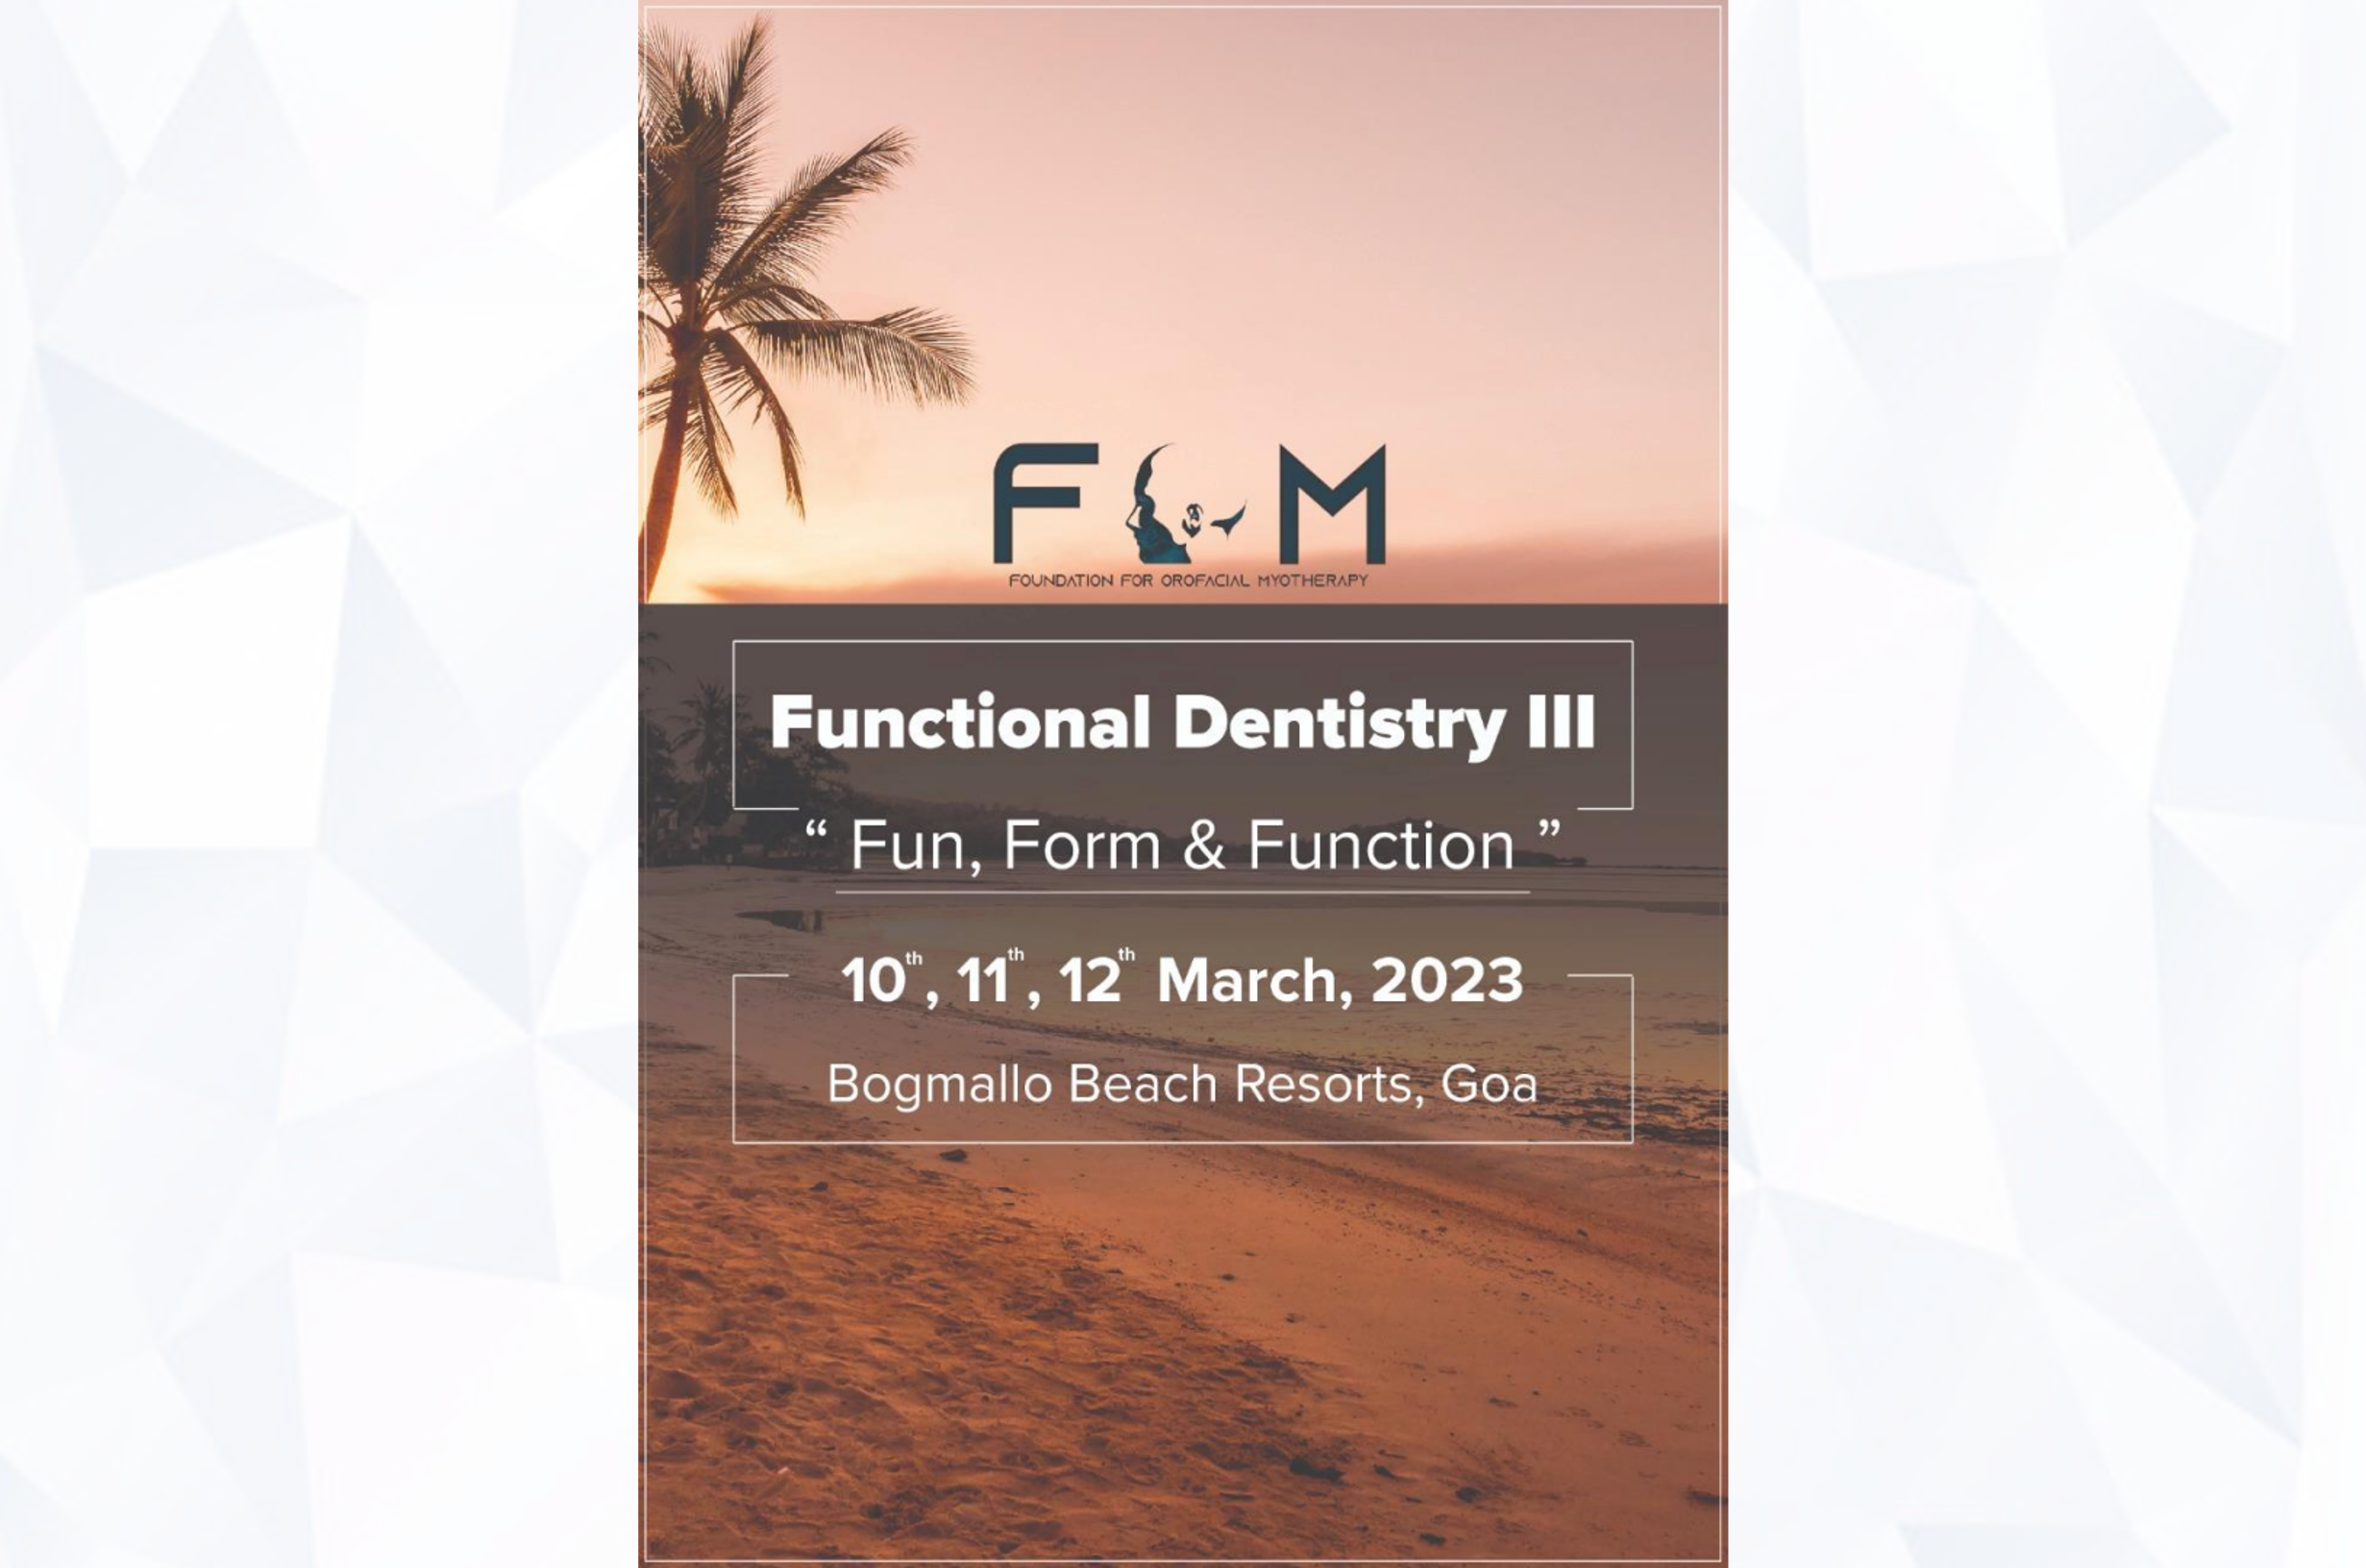 past Event - Functional Dentistry 3 - Fun, Form & Function